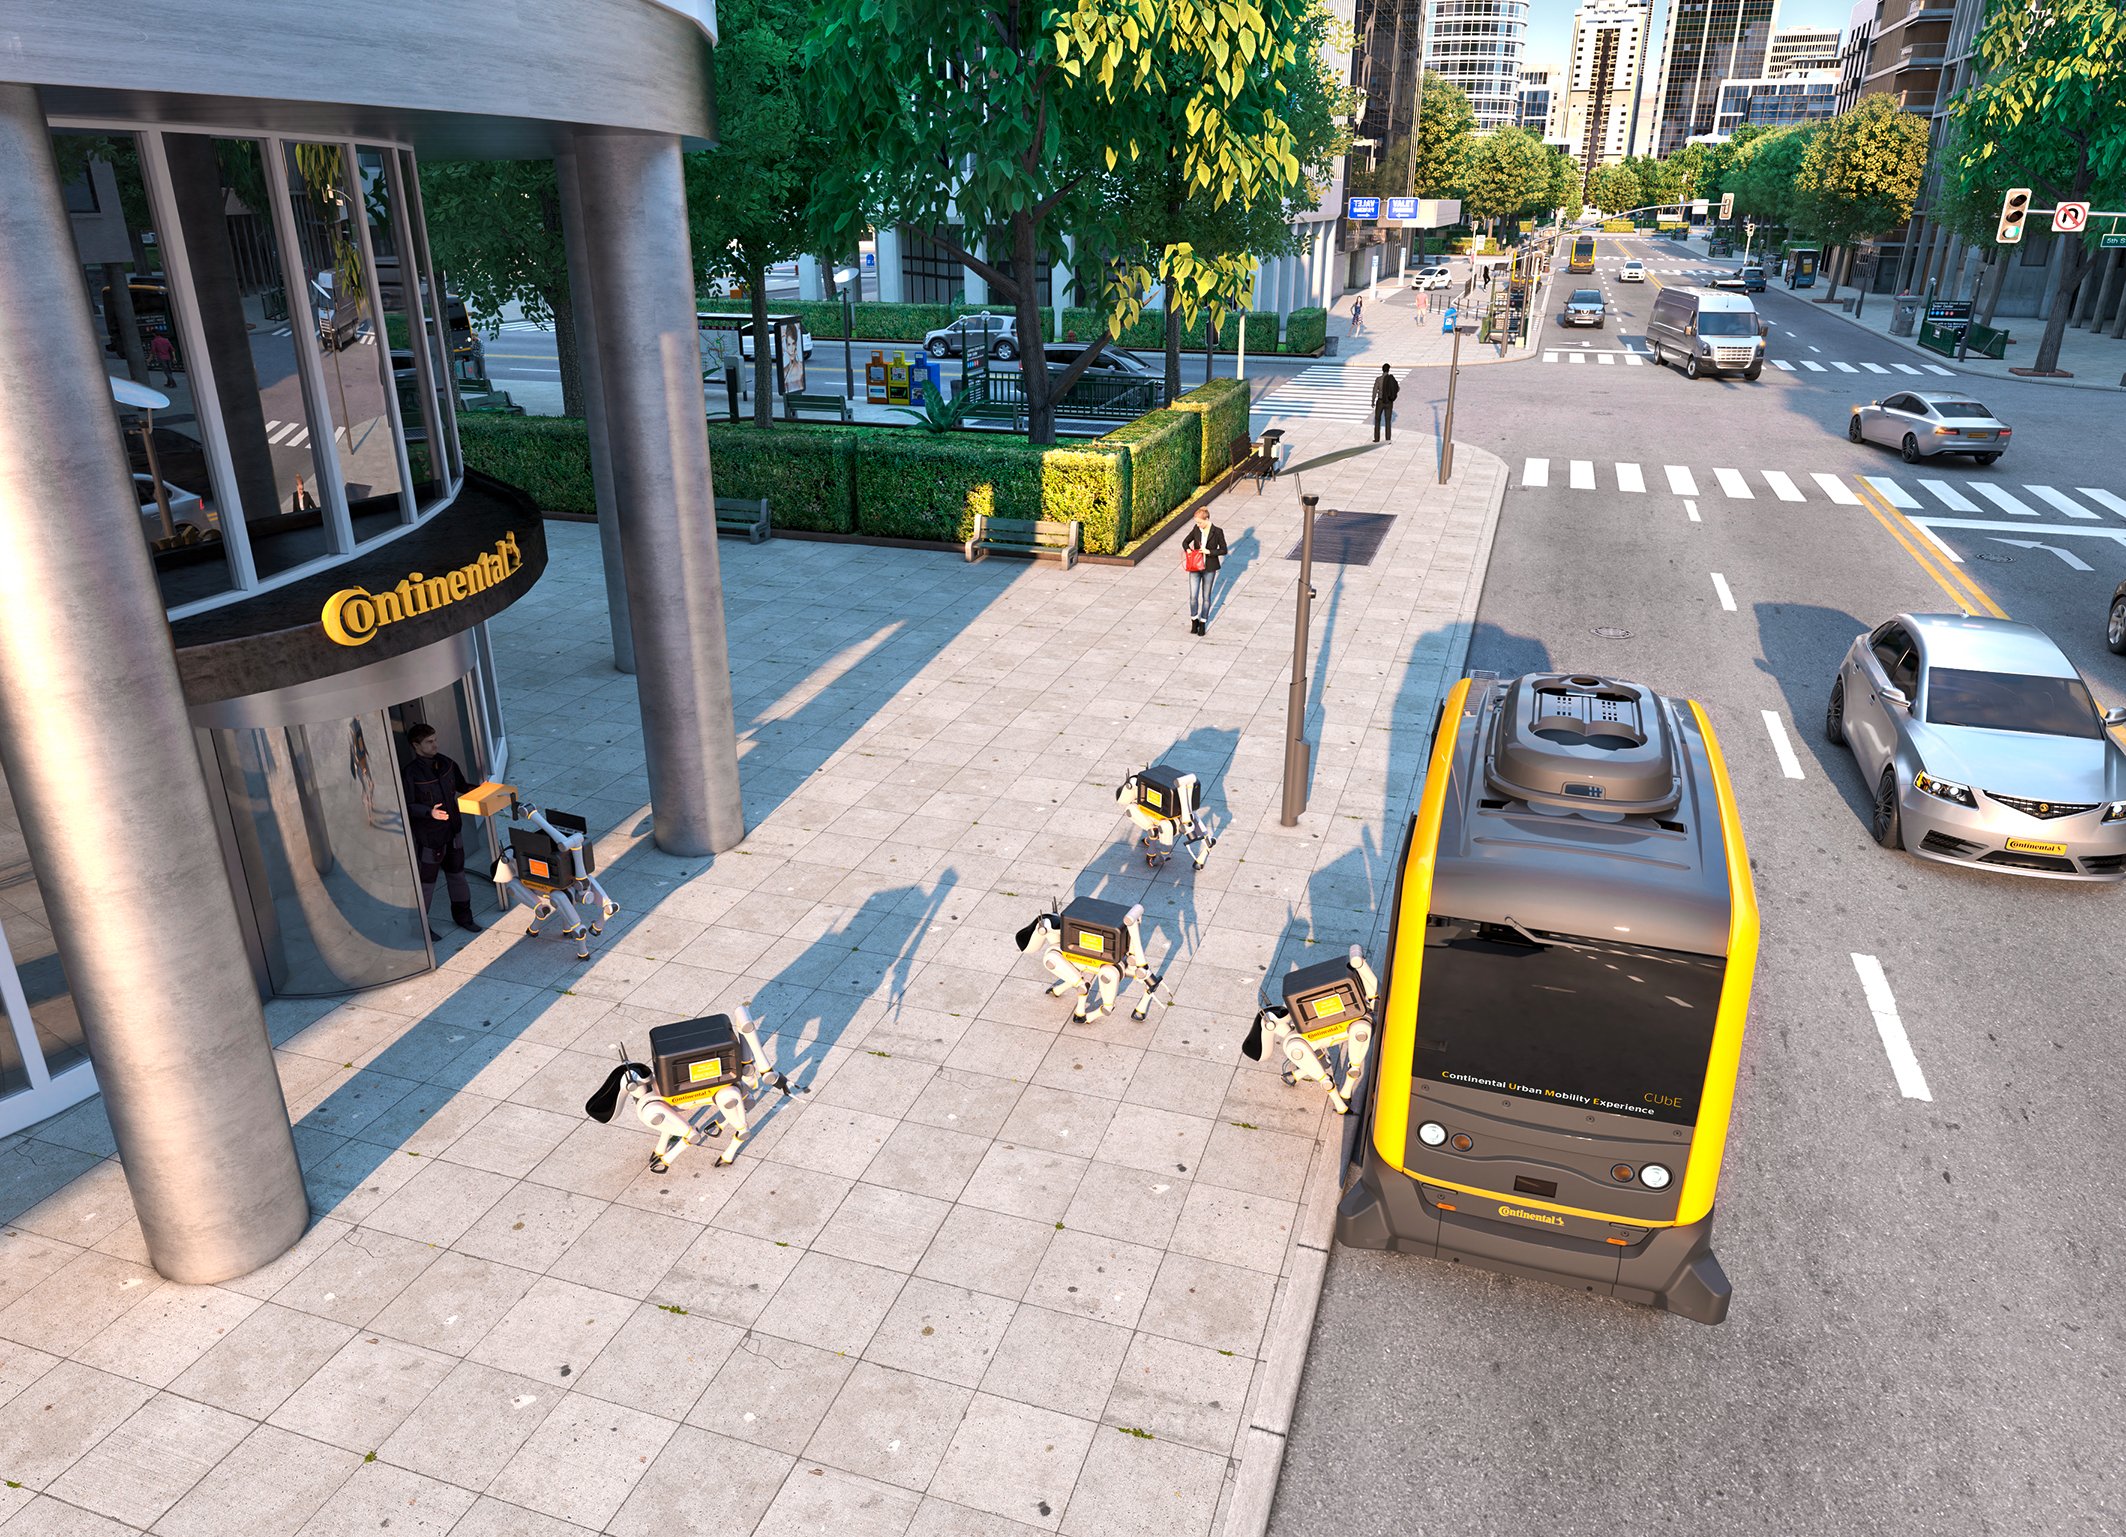 Delivery robots are dispatched from a driverless vehicle. Source: Continental